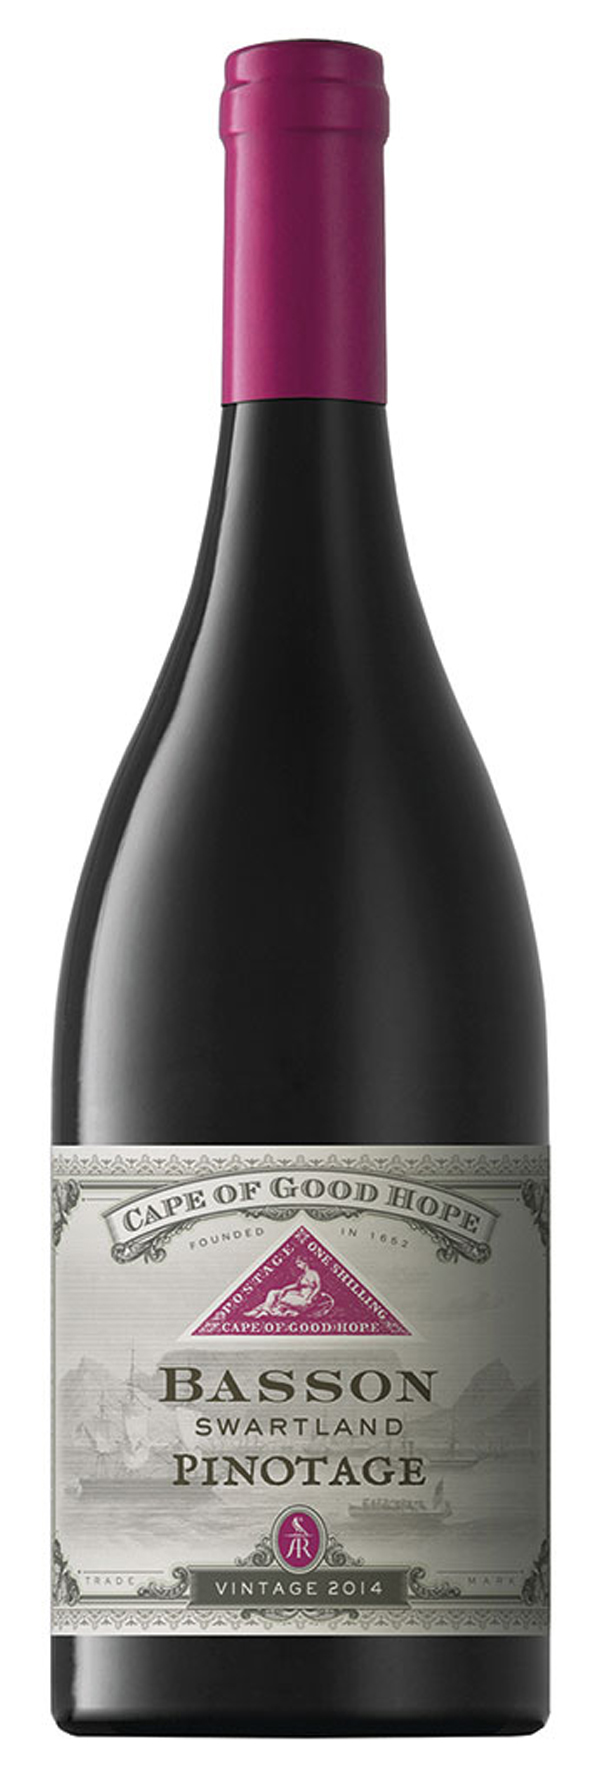 cape_of_good_hope_Basson_pinotage